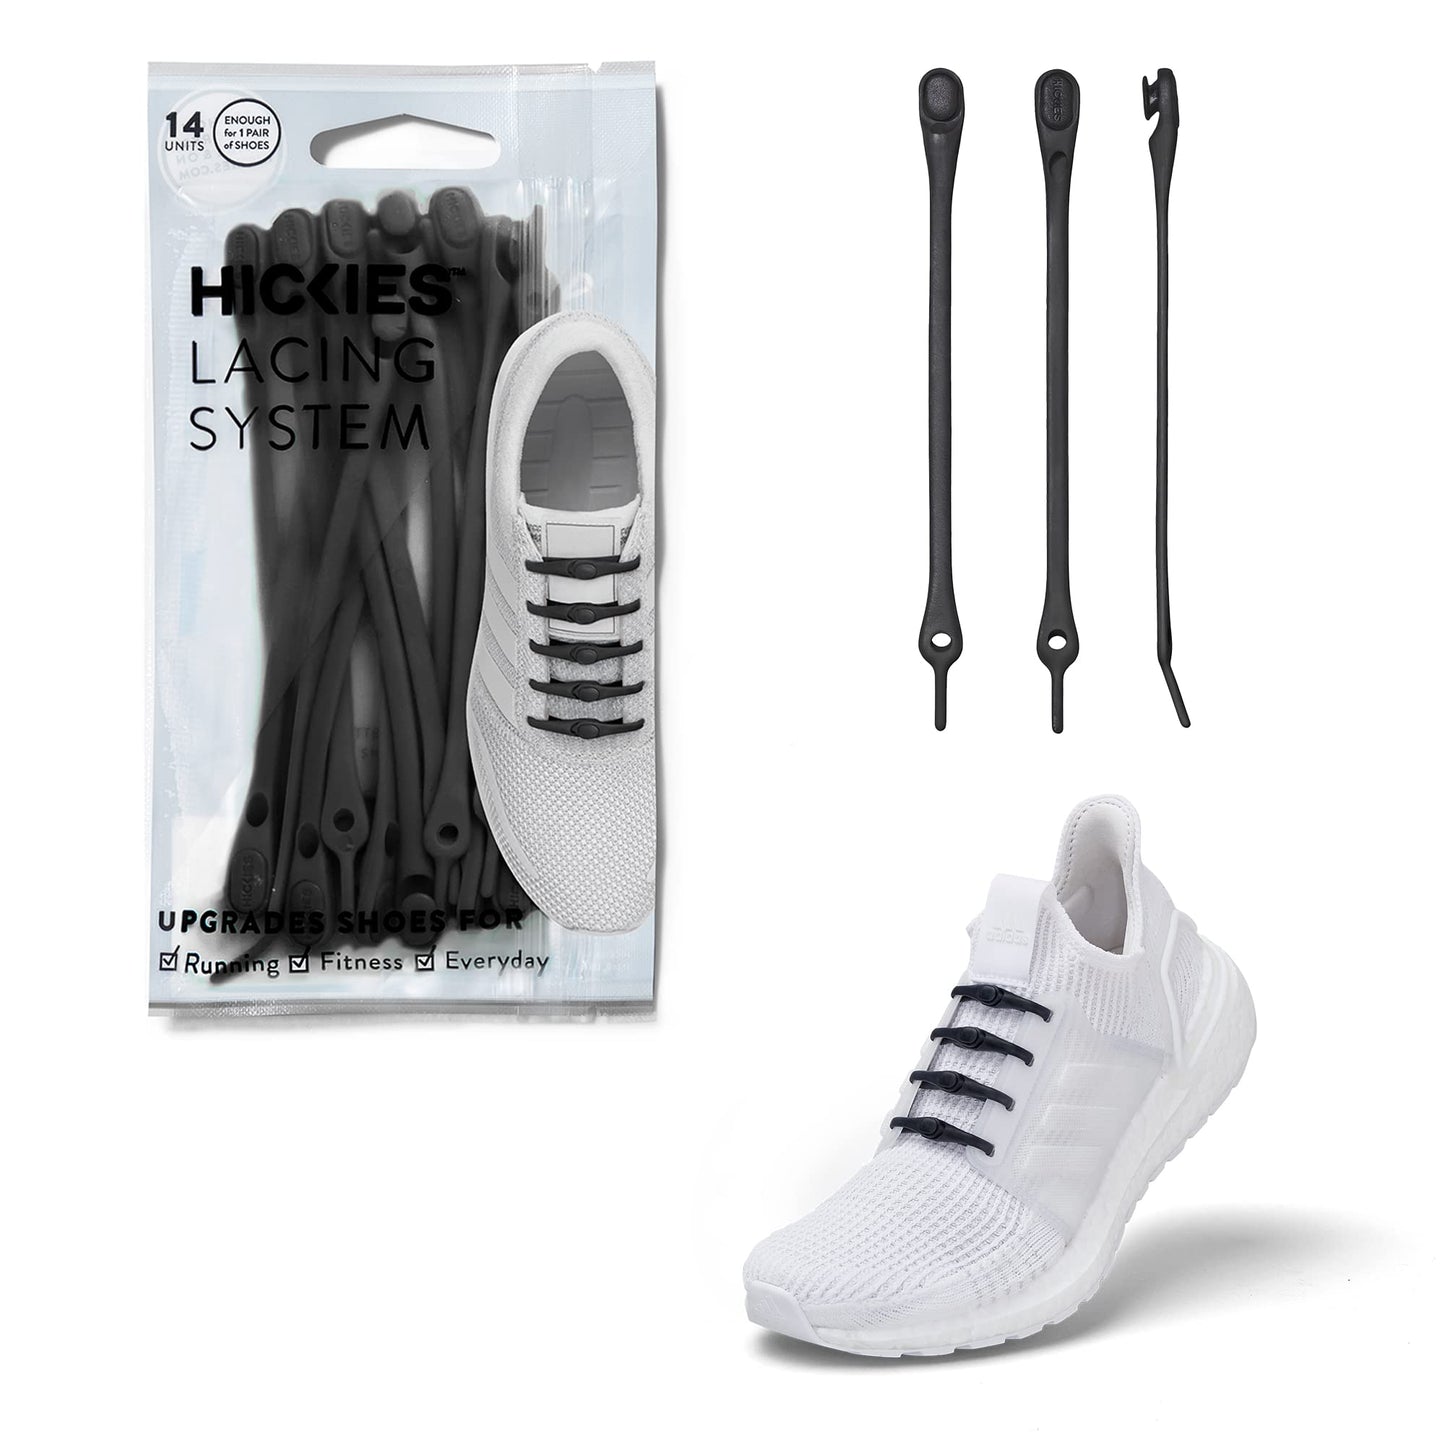 HICKIES 2.0 Performance One-Size Fits All No-Tie Elastic Laces - Black (14 - Opticdeals